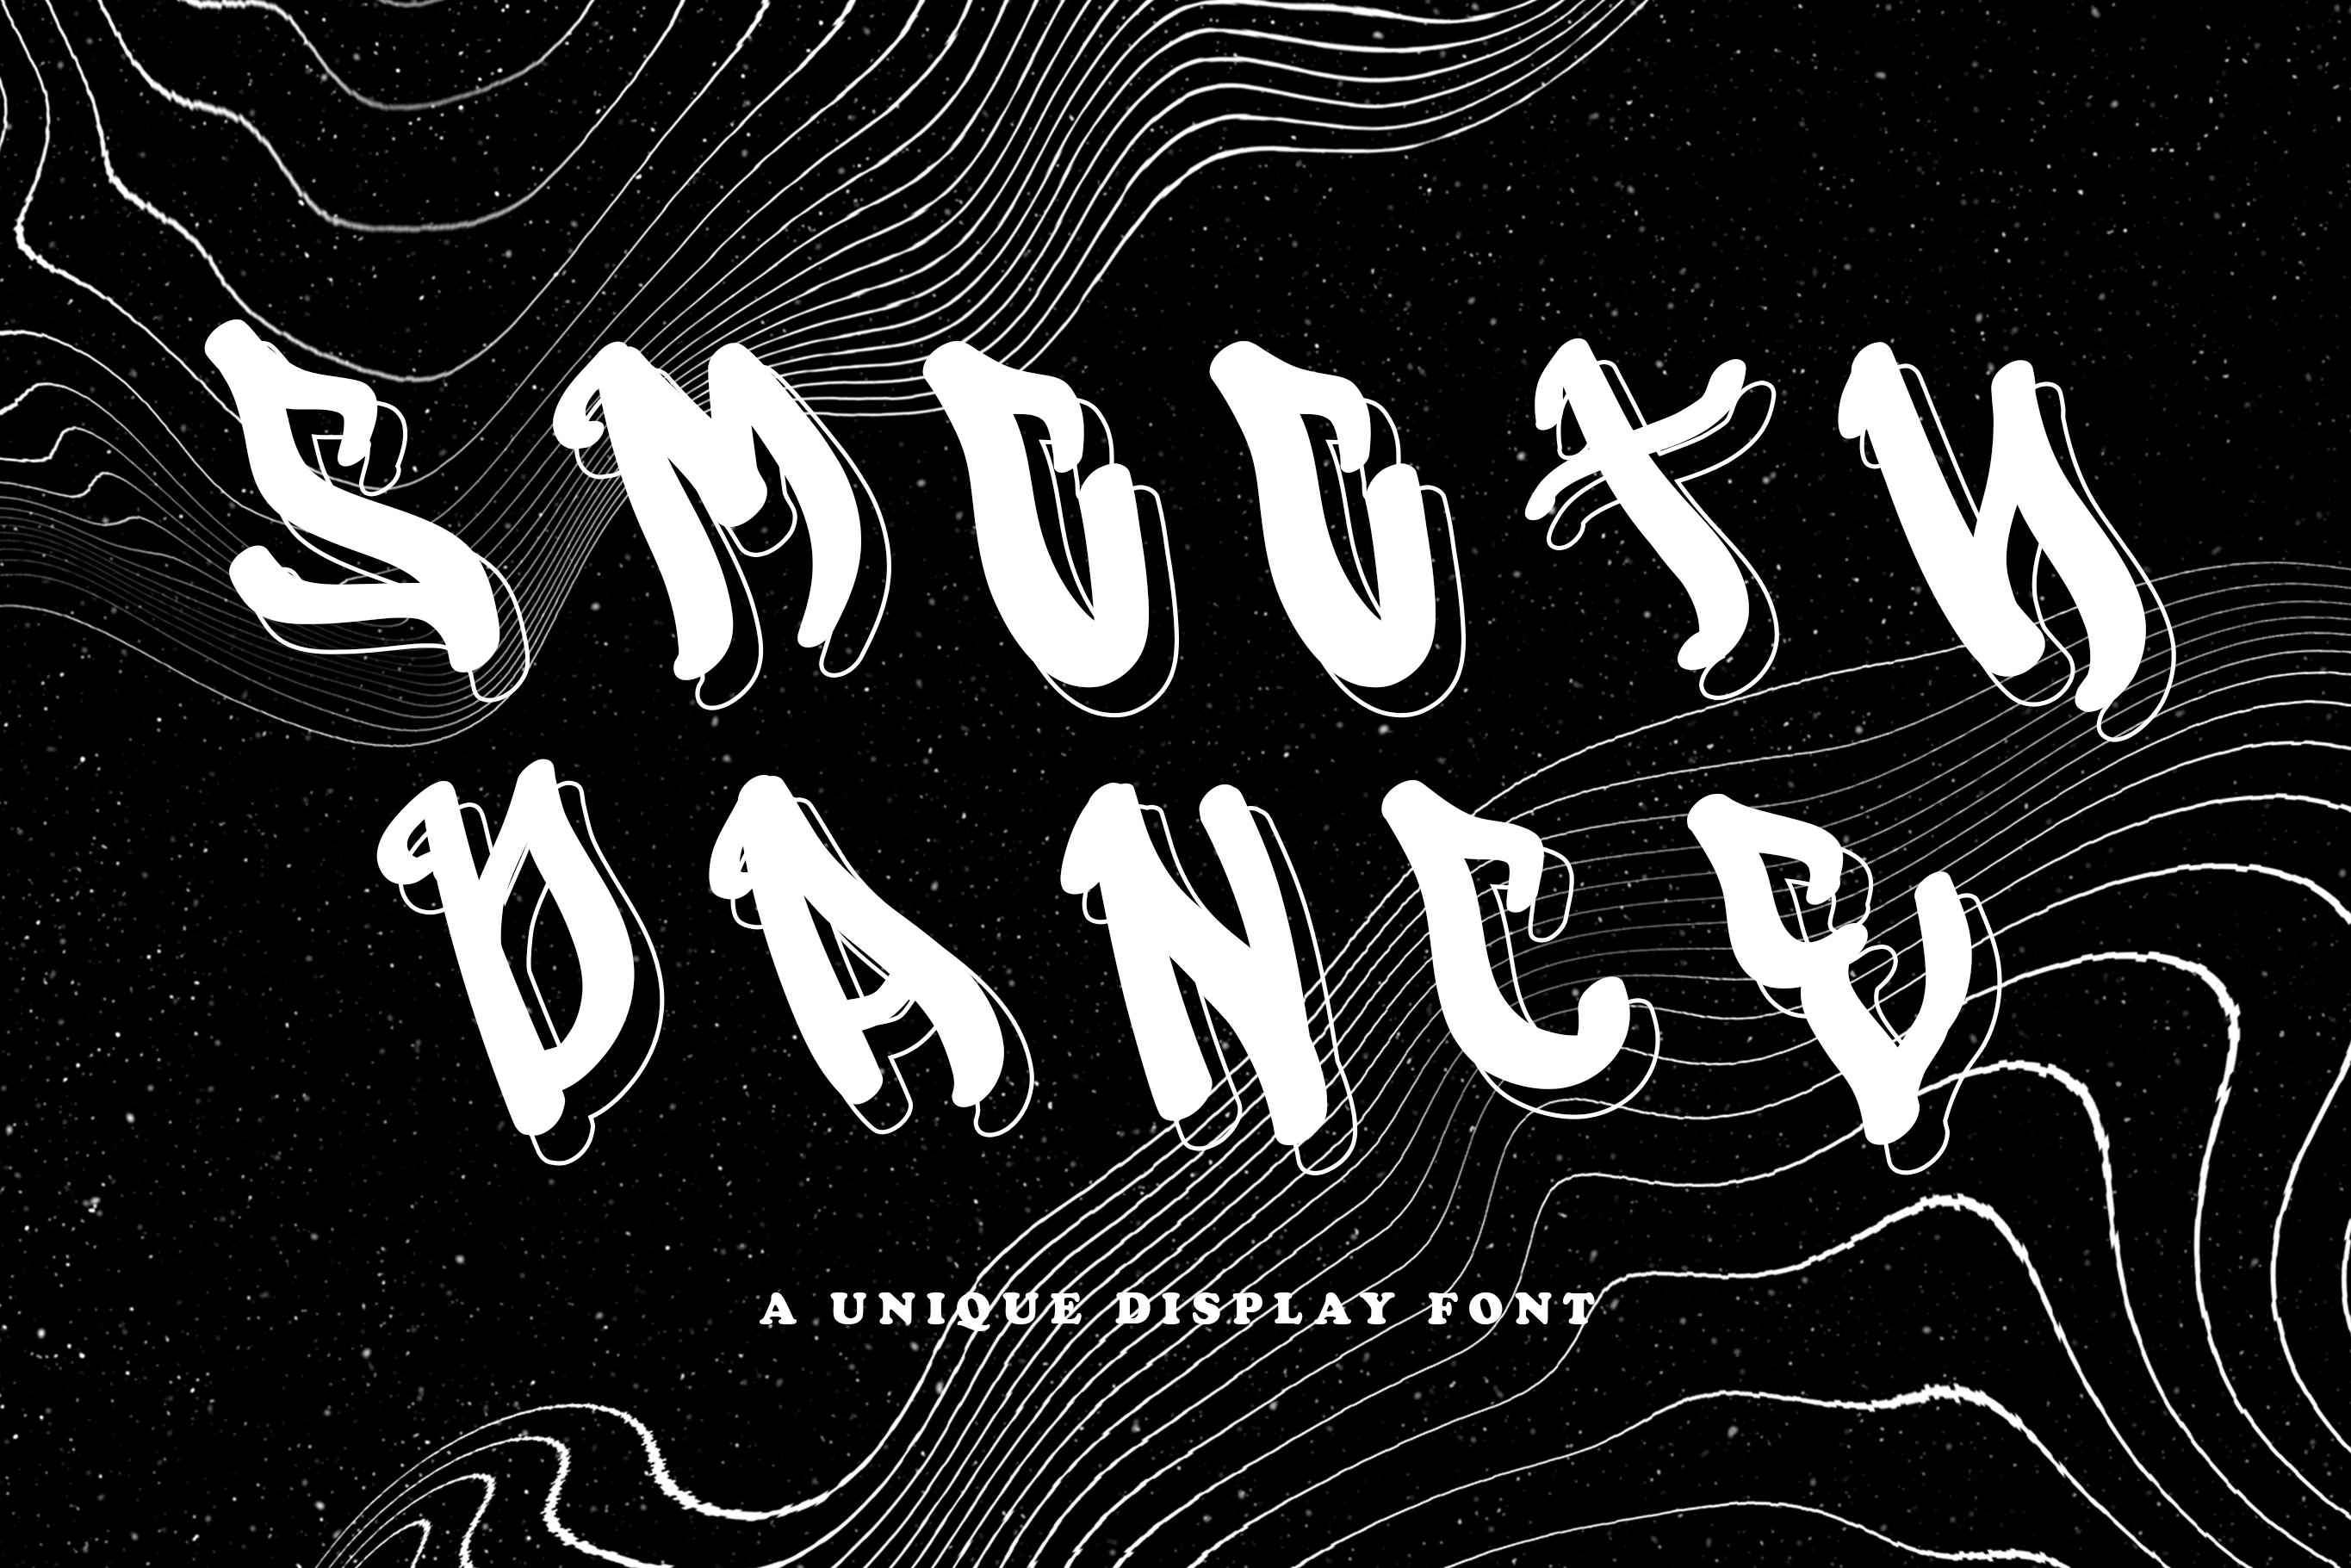 SmoothDance - A Unique Display Font cover image.